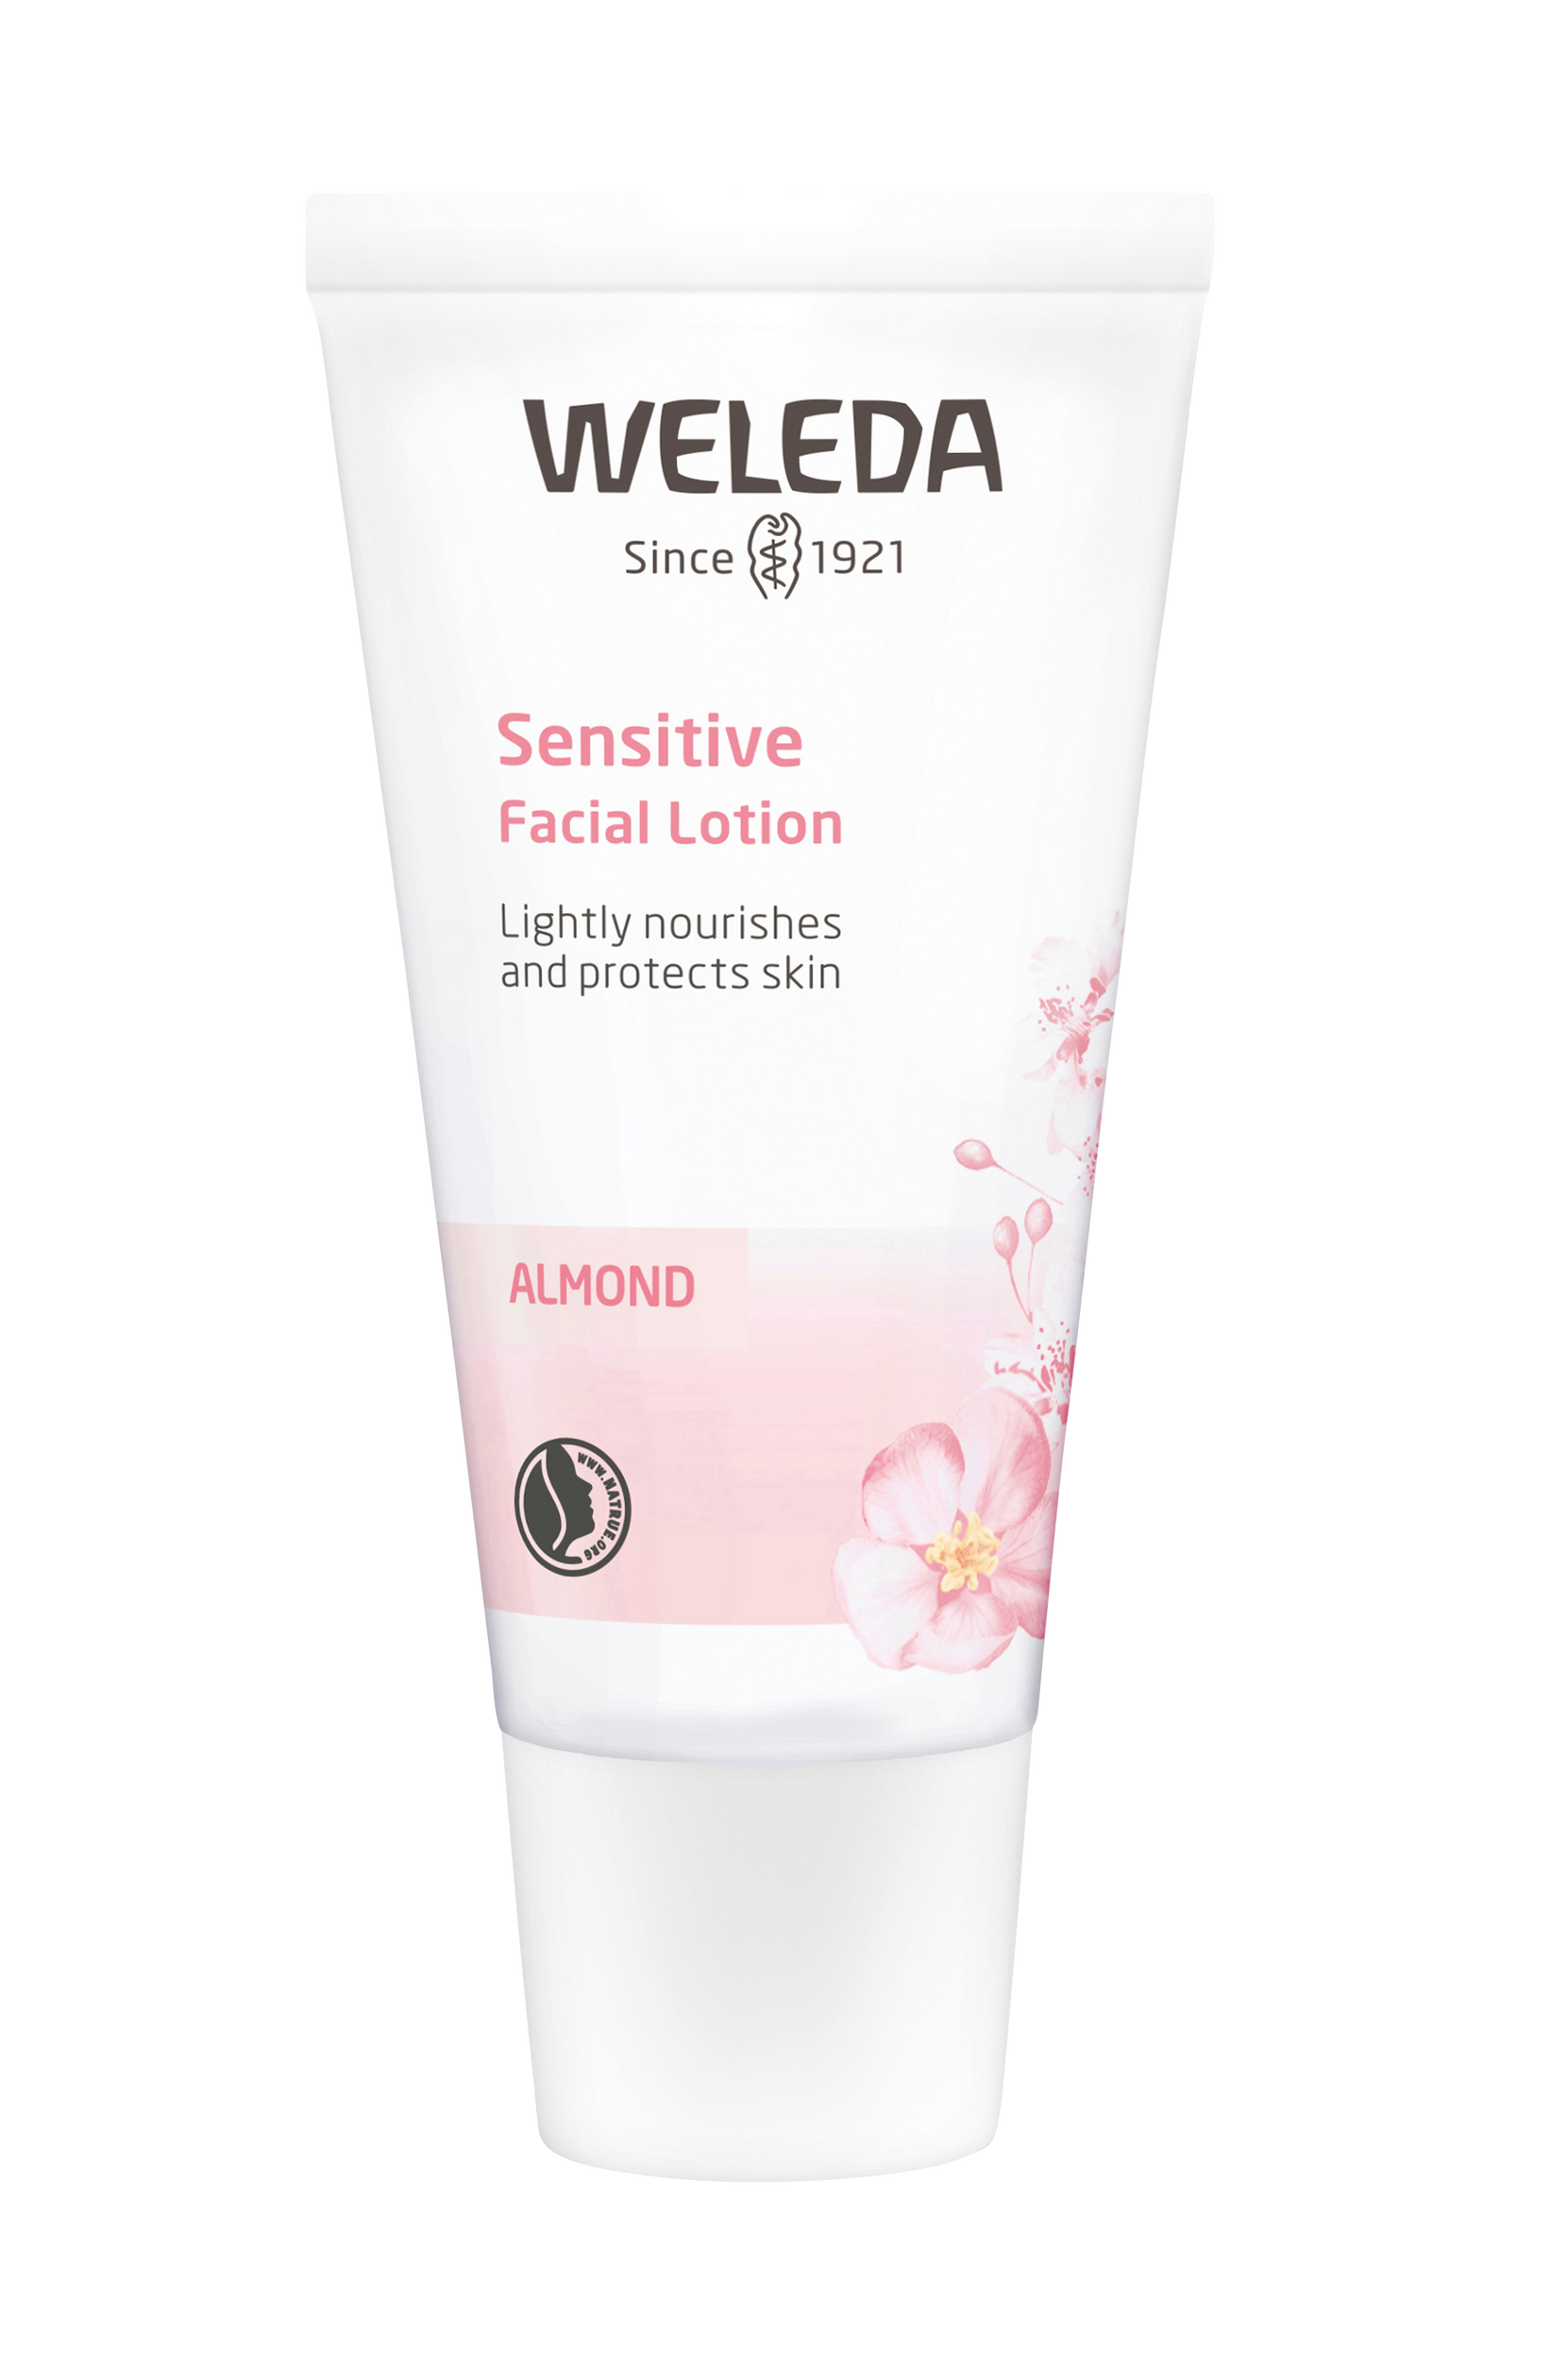 Almond Soothing Facial Lotion 30 ml, Weleda